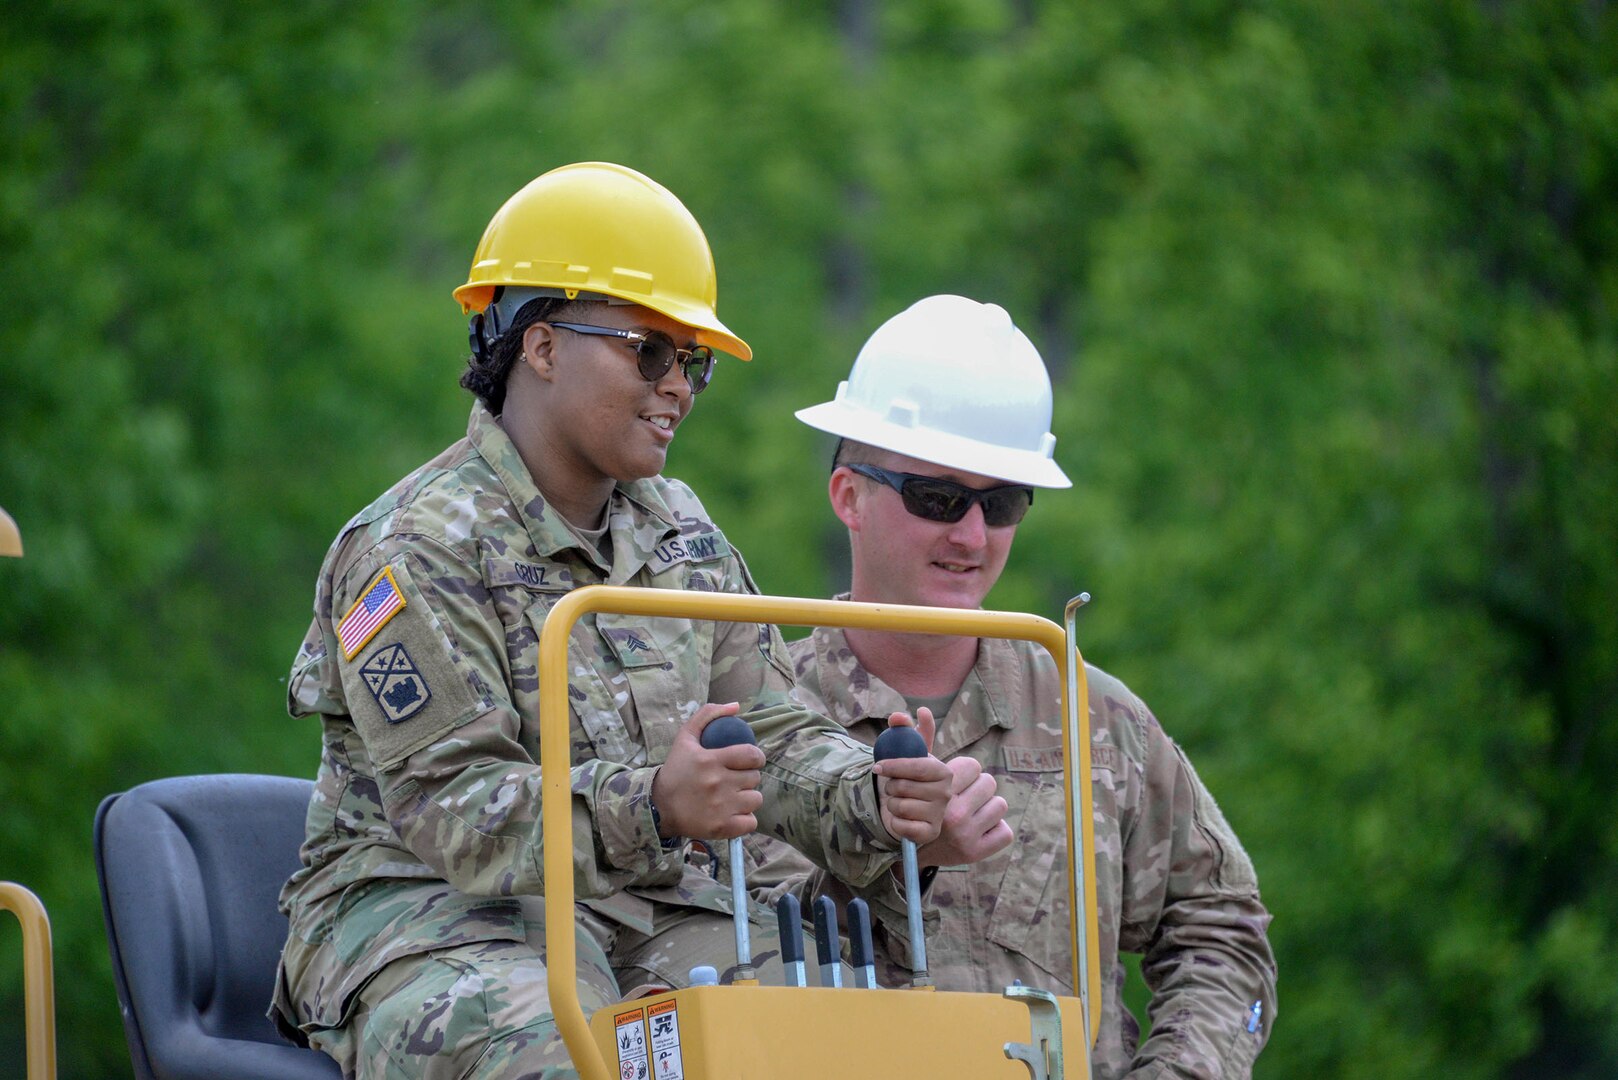 Sgt. Shantophia Cruz listens as Tech. Sgt. Doug Haveman explains operation of the Vermeer RT950.Airmen from the 241st Engineering Installation Squadron and Soldiers from the 230th Signal Company came together in Chatoosa, Georgia, May 9, 2019, to perform joint training. The 241st EIS Airmen provided training on heavy equipment needed to dig trenches for installation of fiber optics and other communications services.